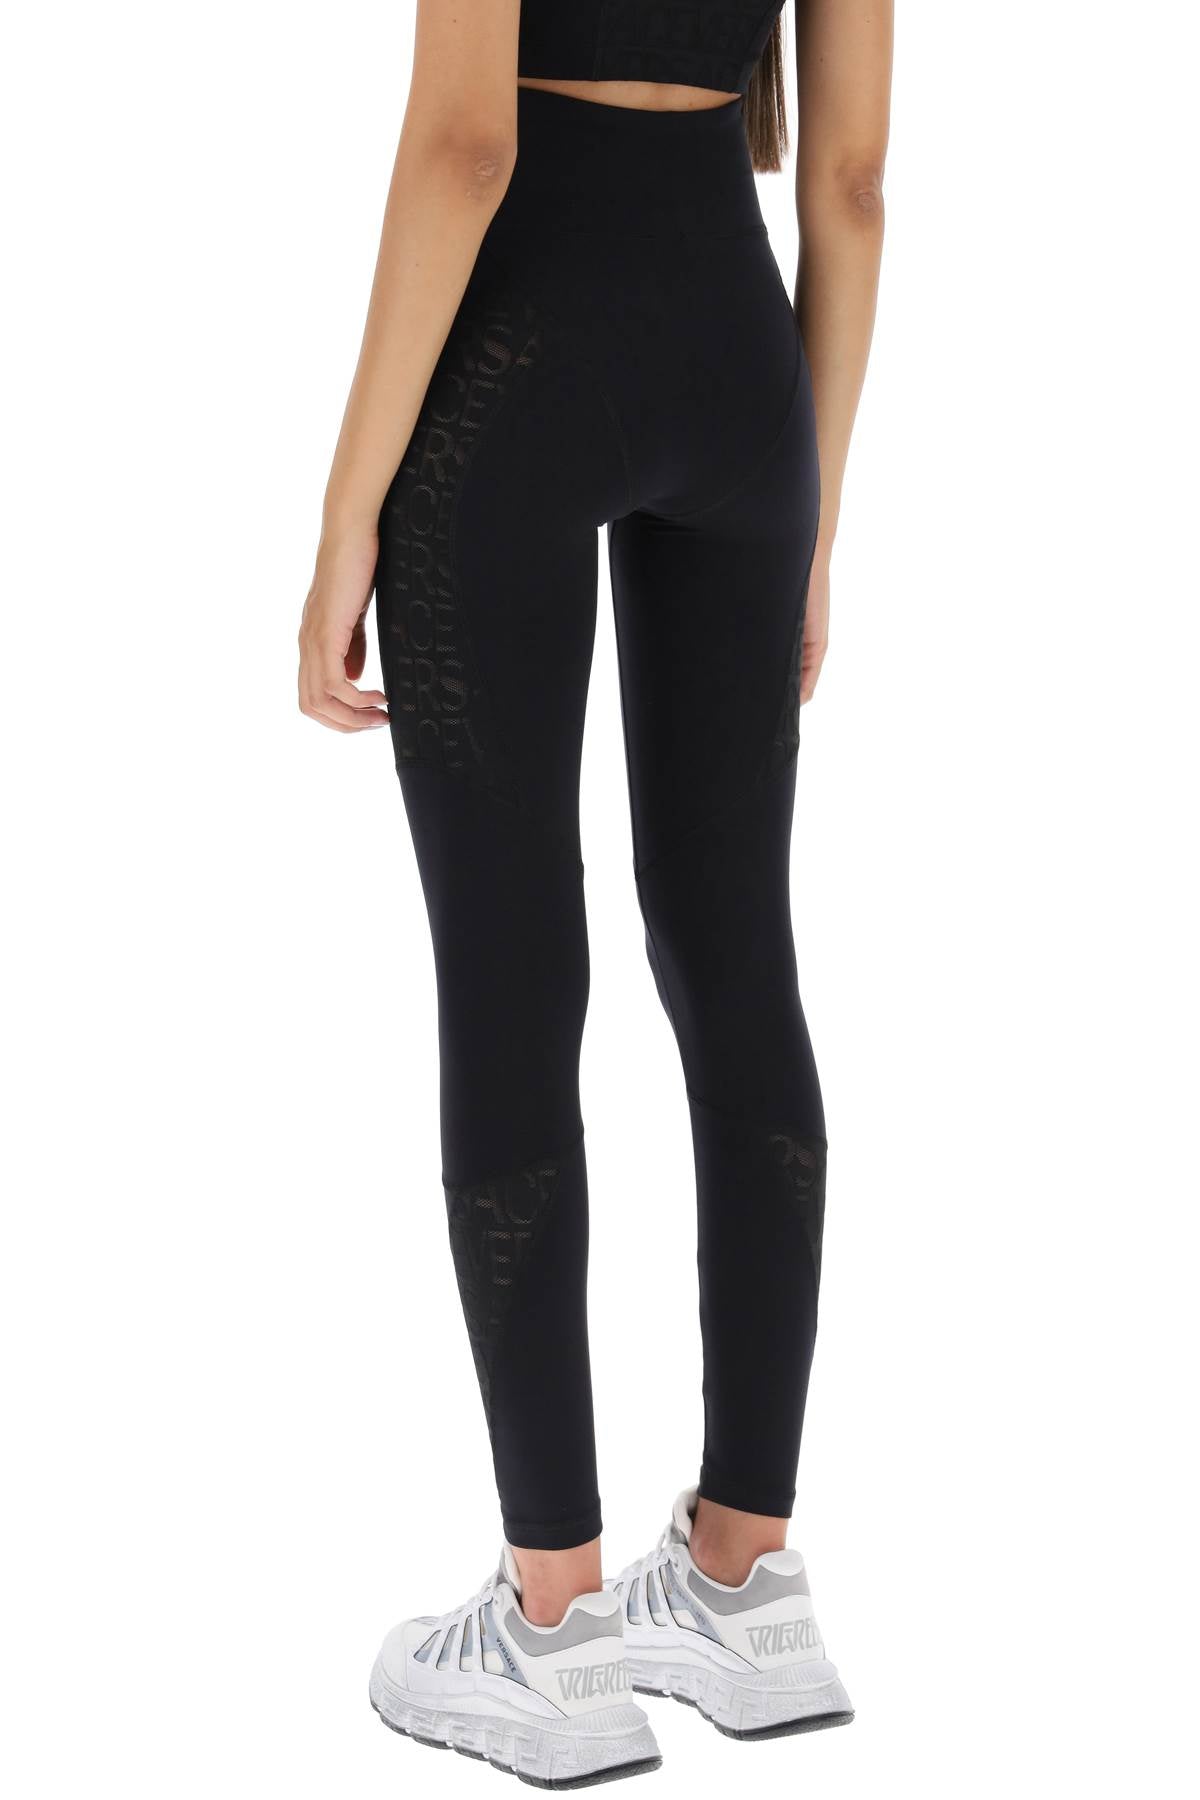 Versace sports leggings with lettering-2